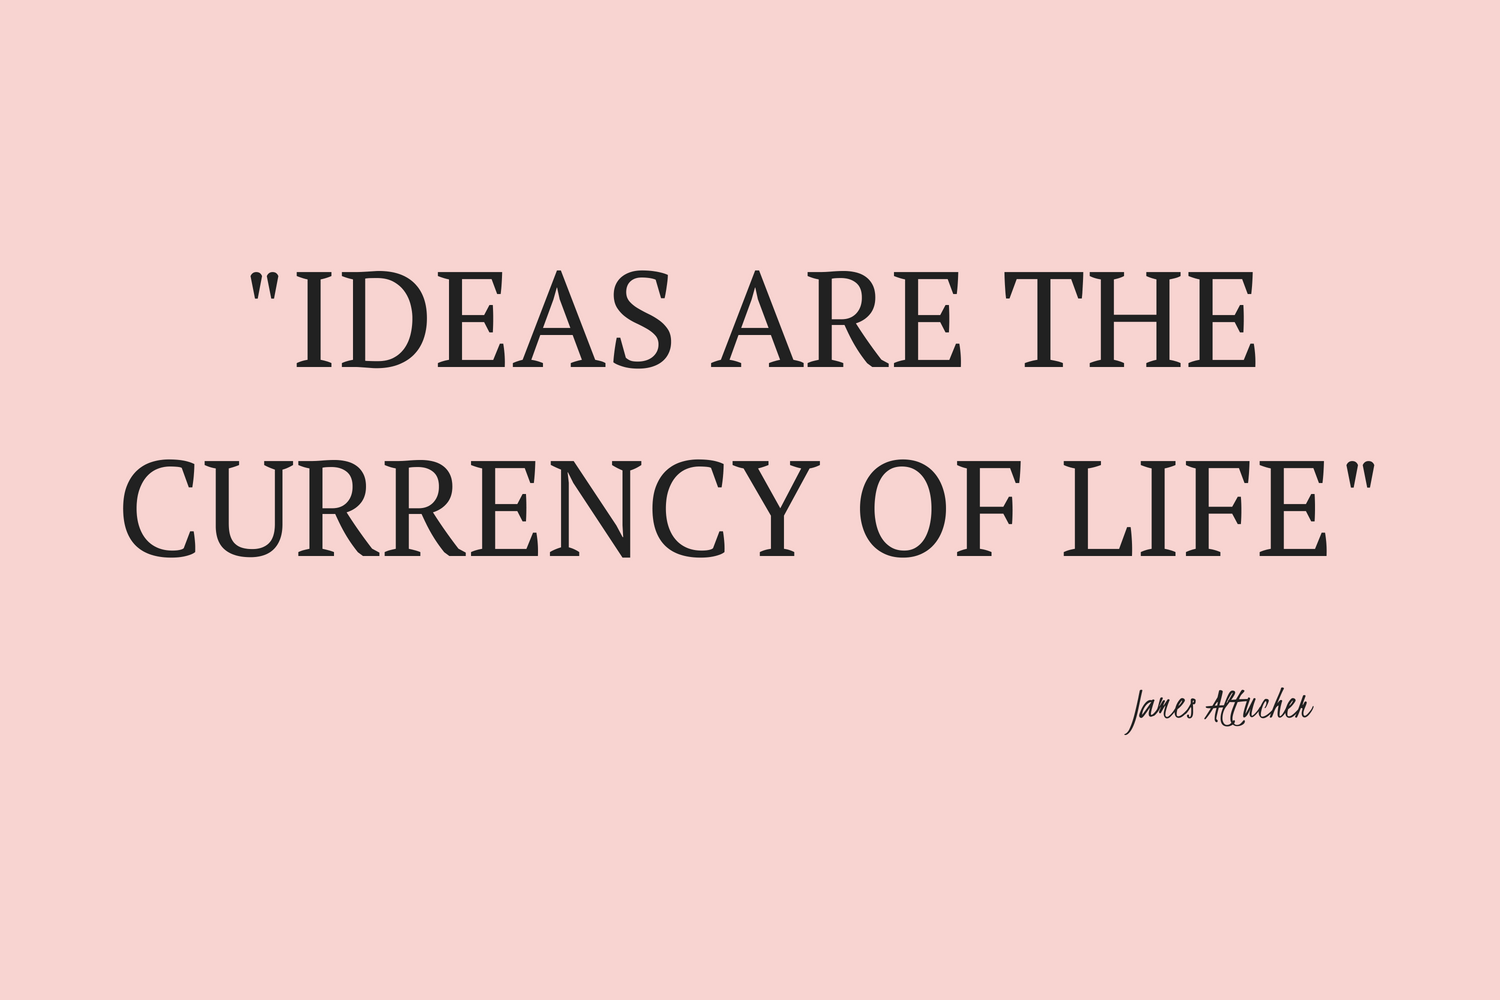 Ideas are the currency of life